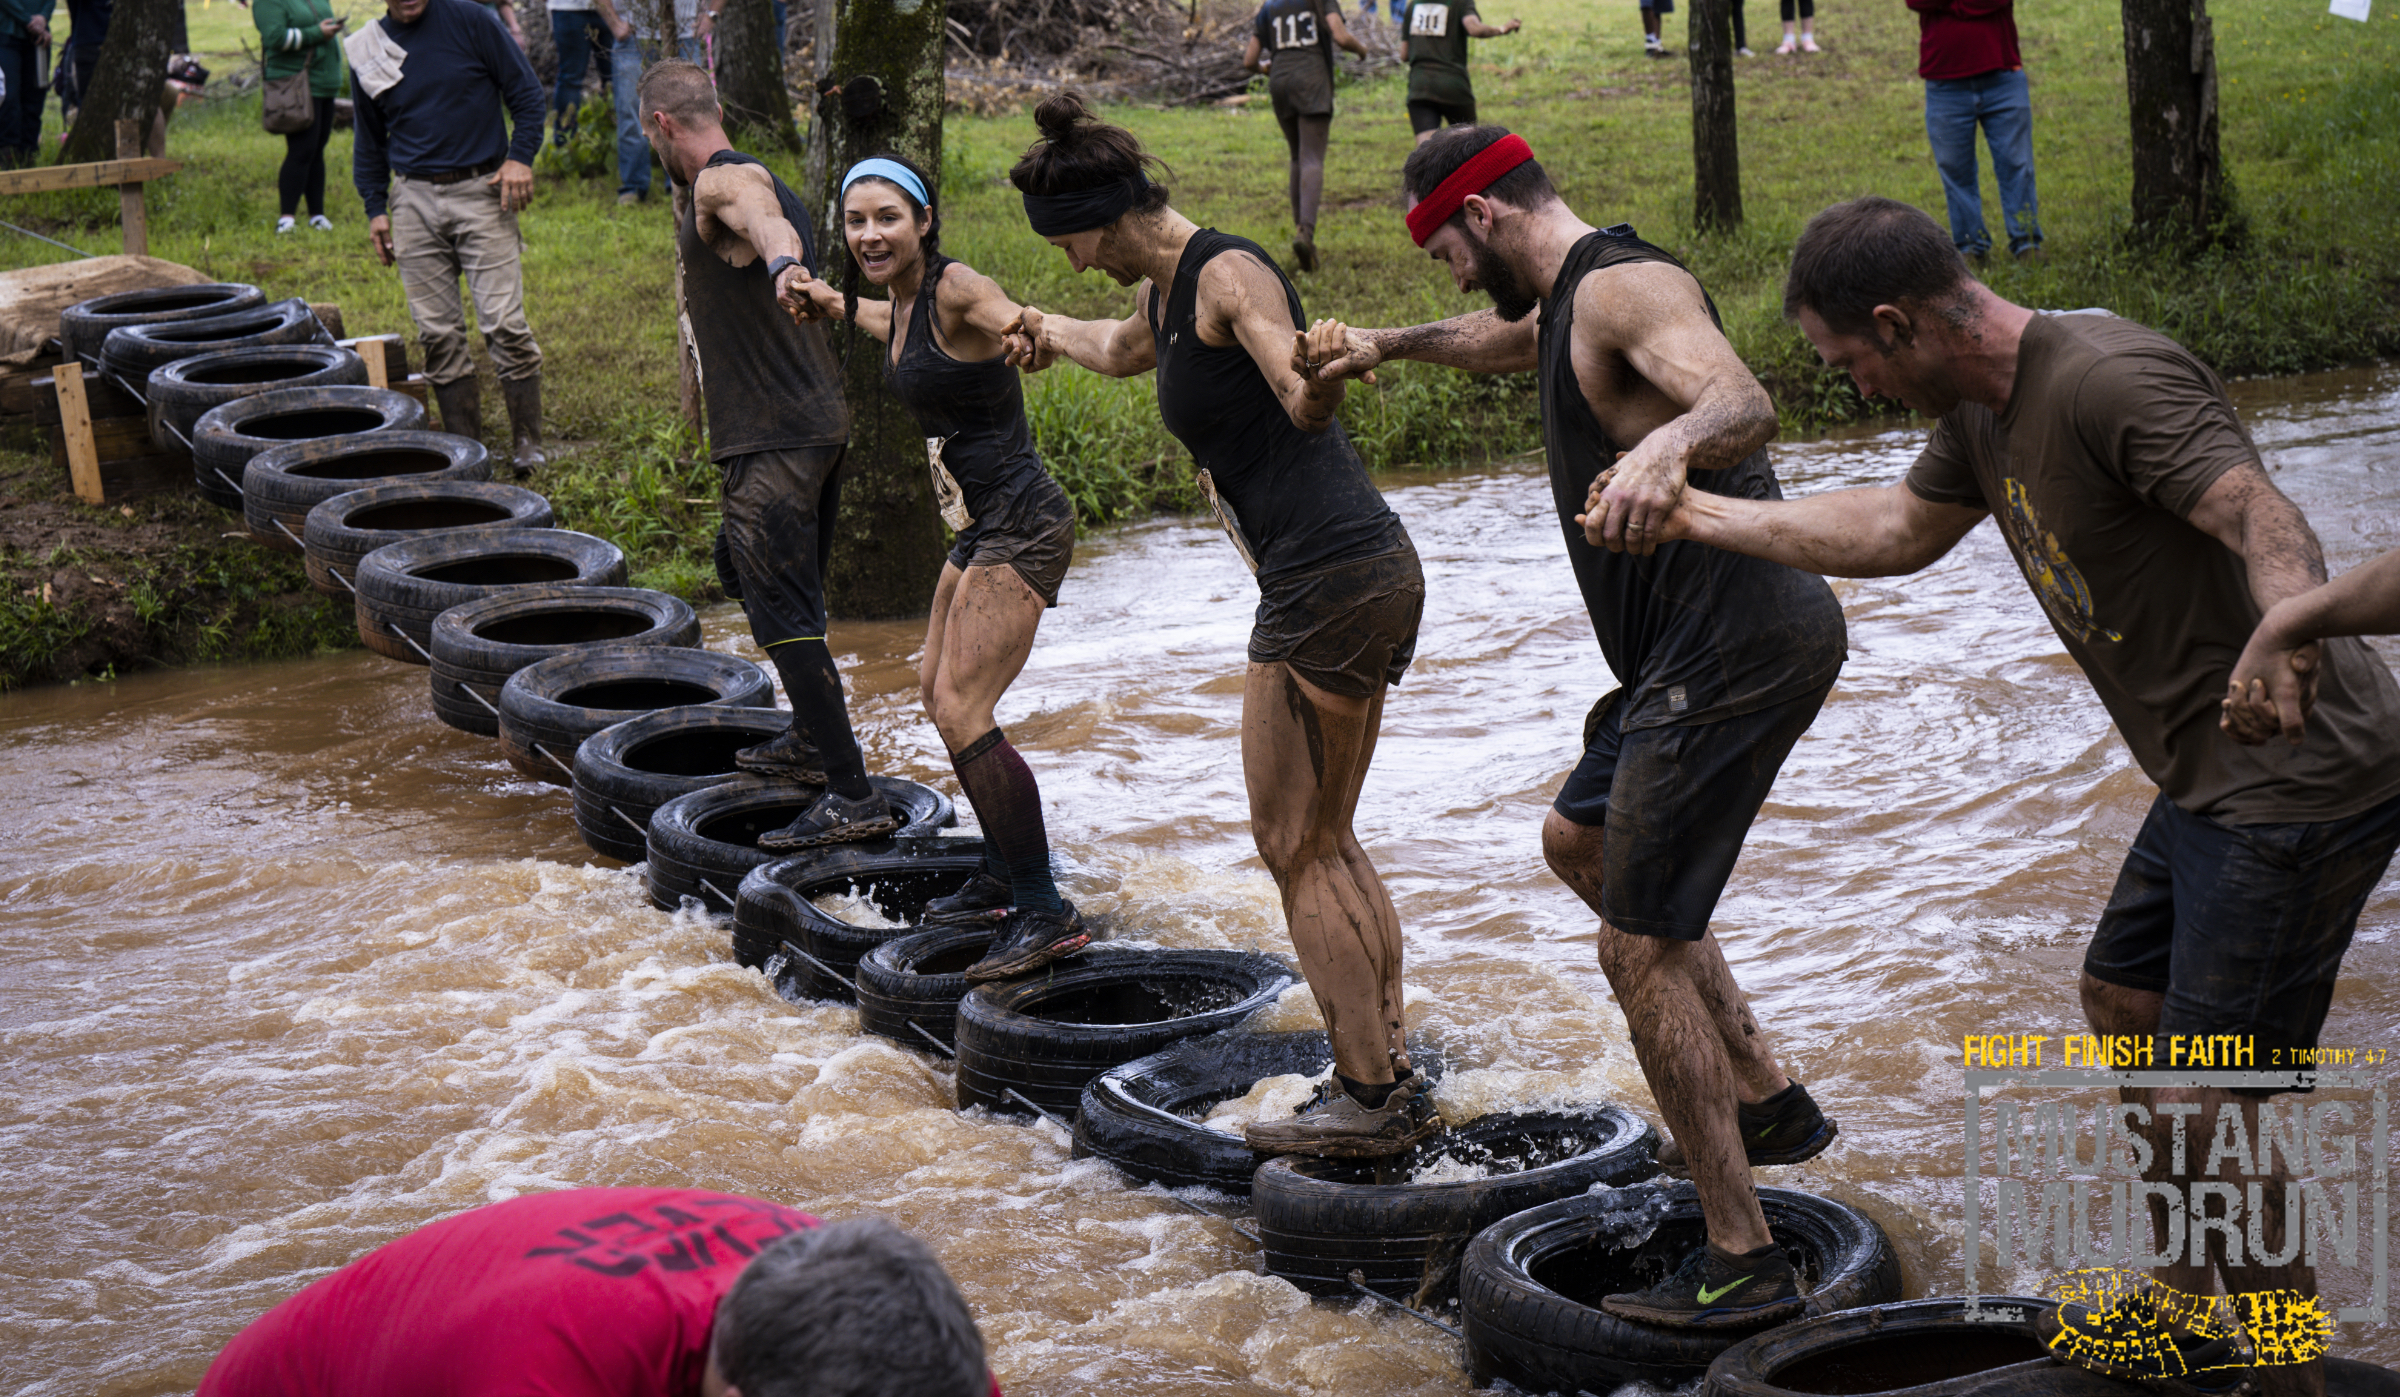 Mustang Mud Run- Clean Wholesome Fun - The Madison Record